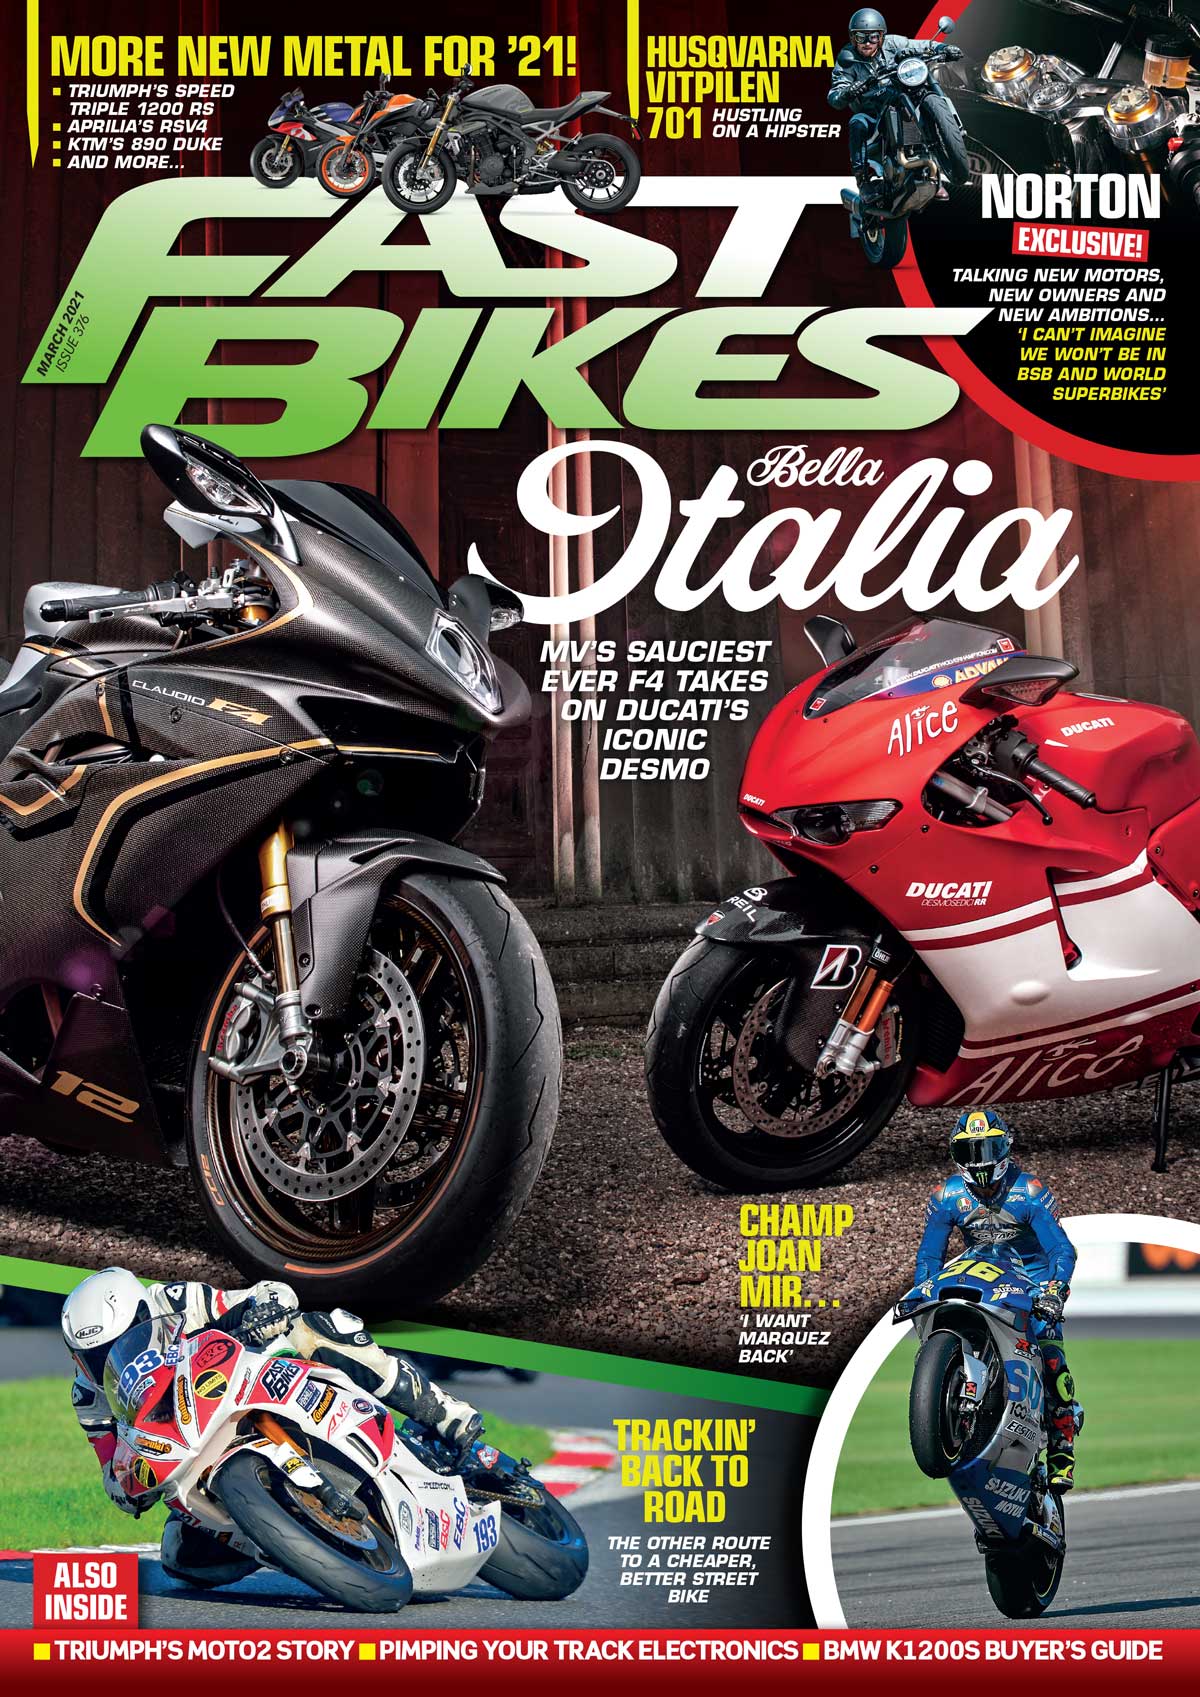 PREVIEW: March issue of Fast Bikes magazine